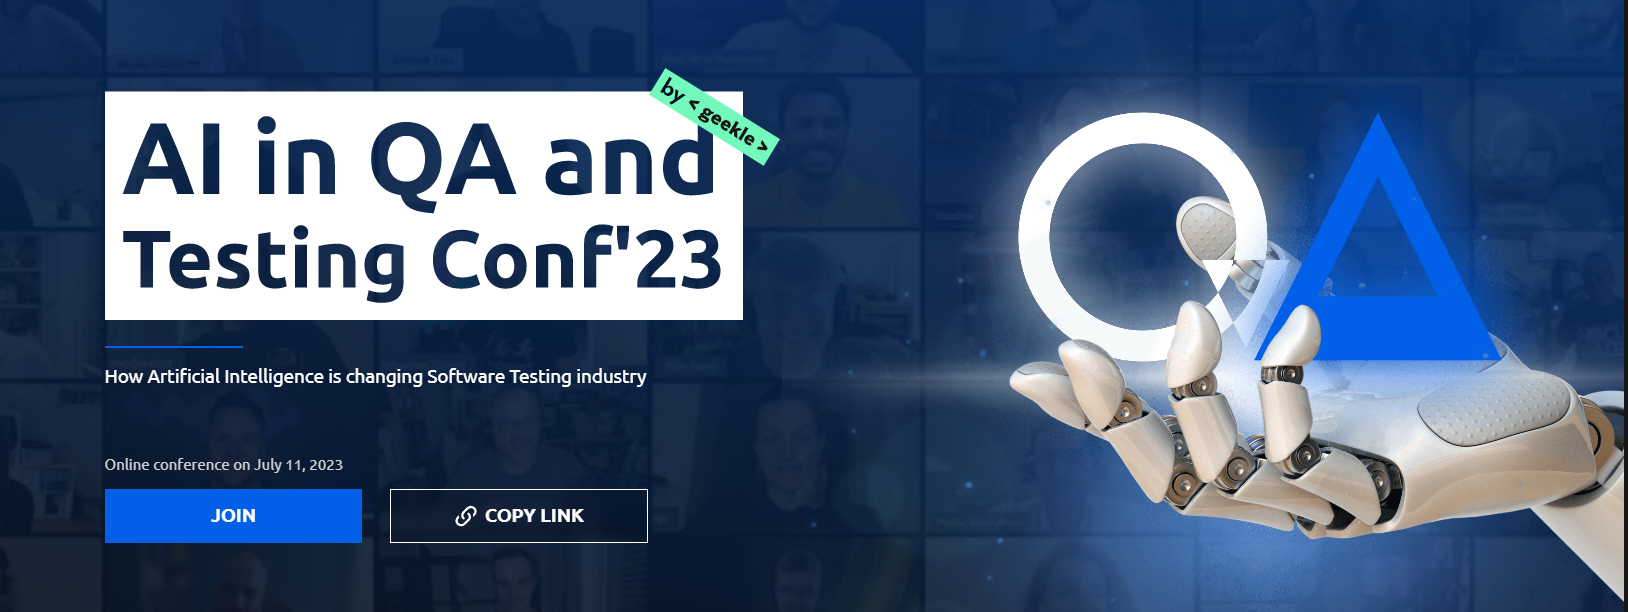 AI in QA and Testing Conference'23